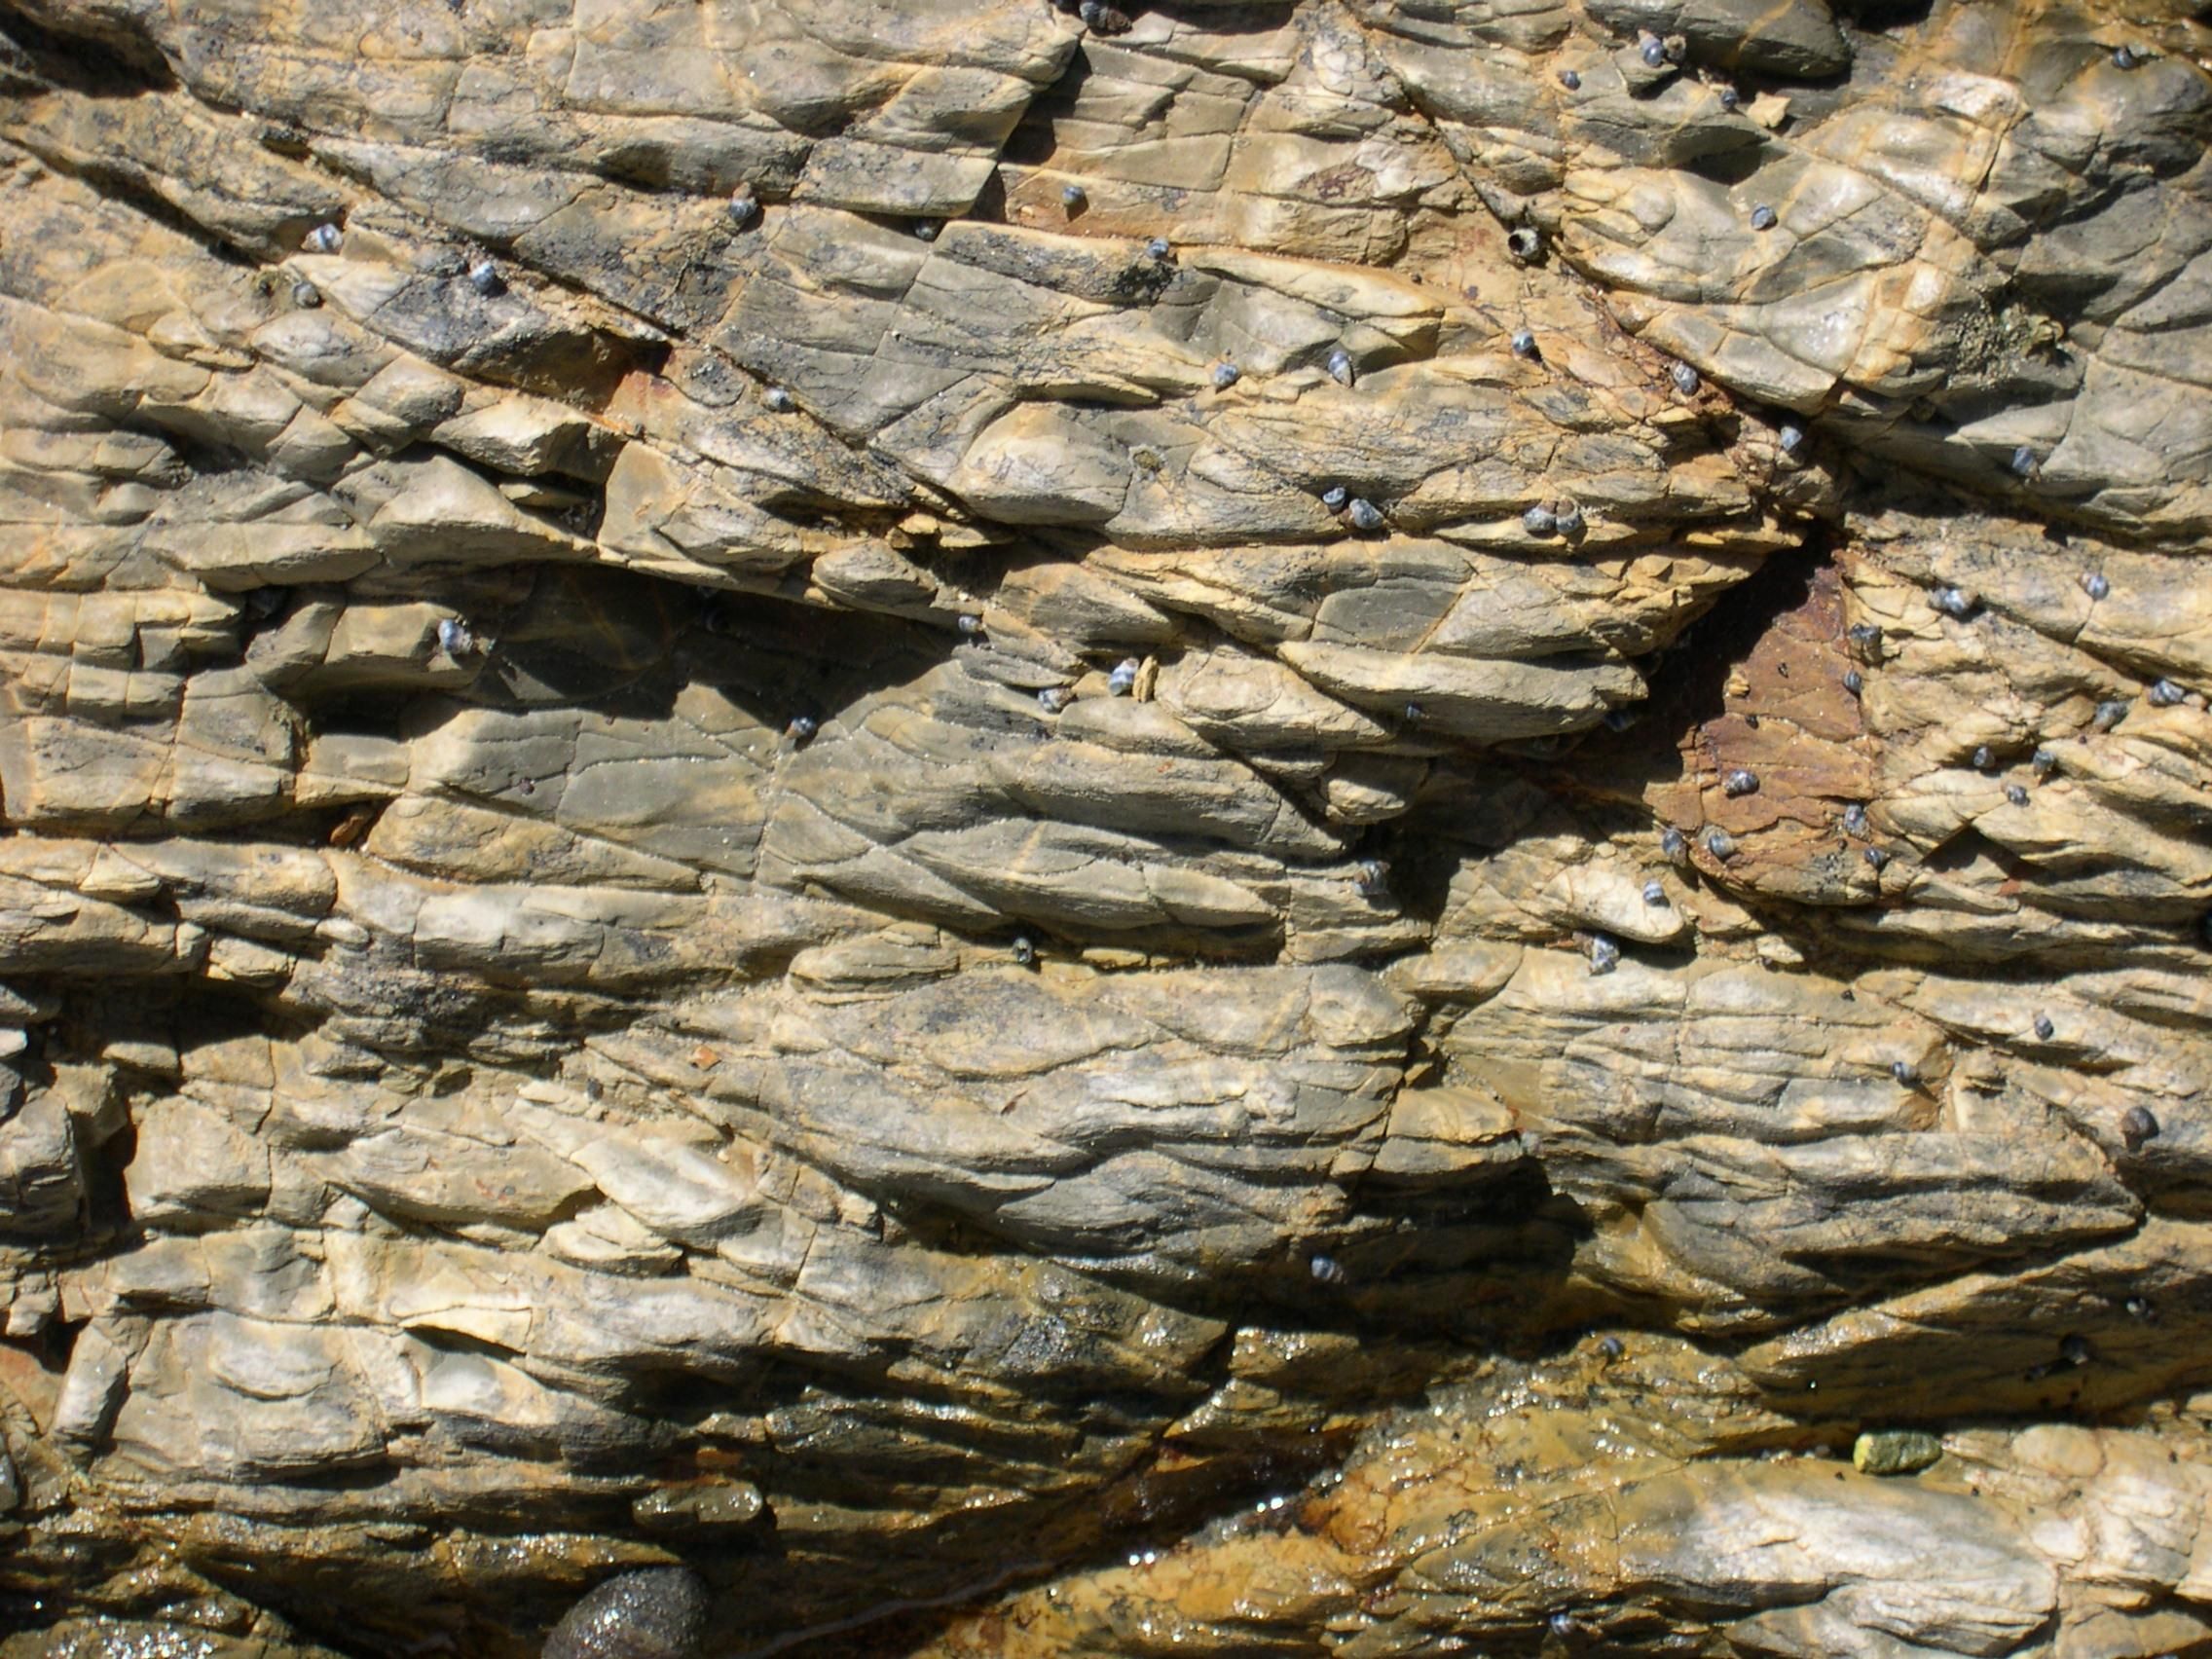 File:Rock texture close up.jpg - Wikimedia Commons